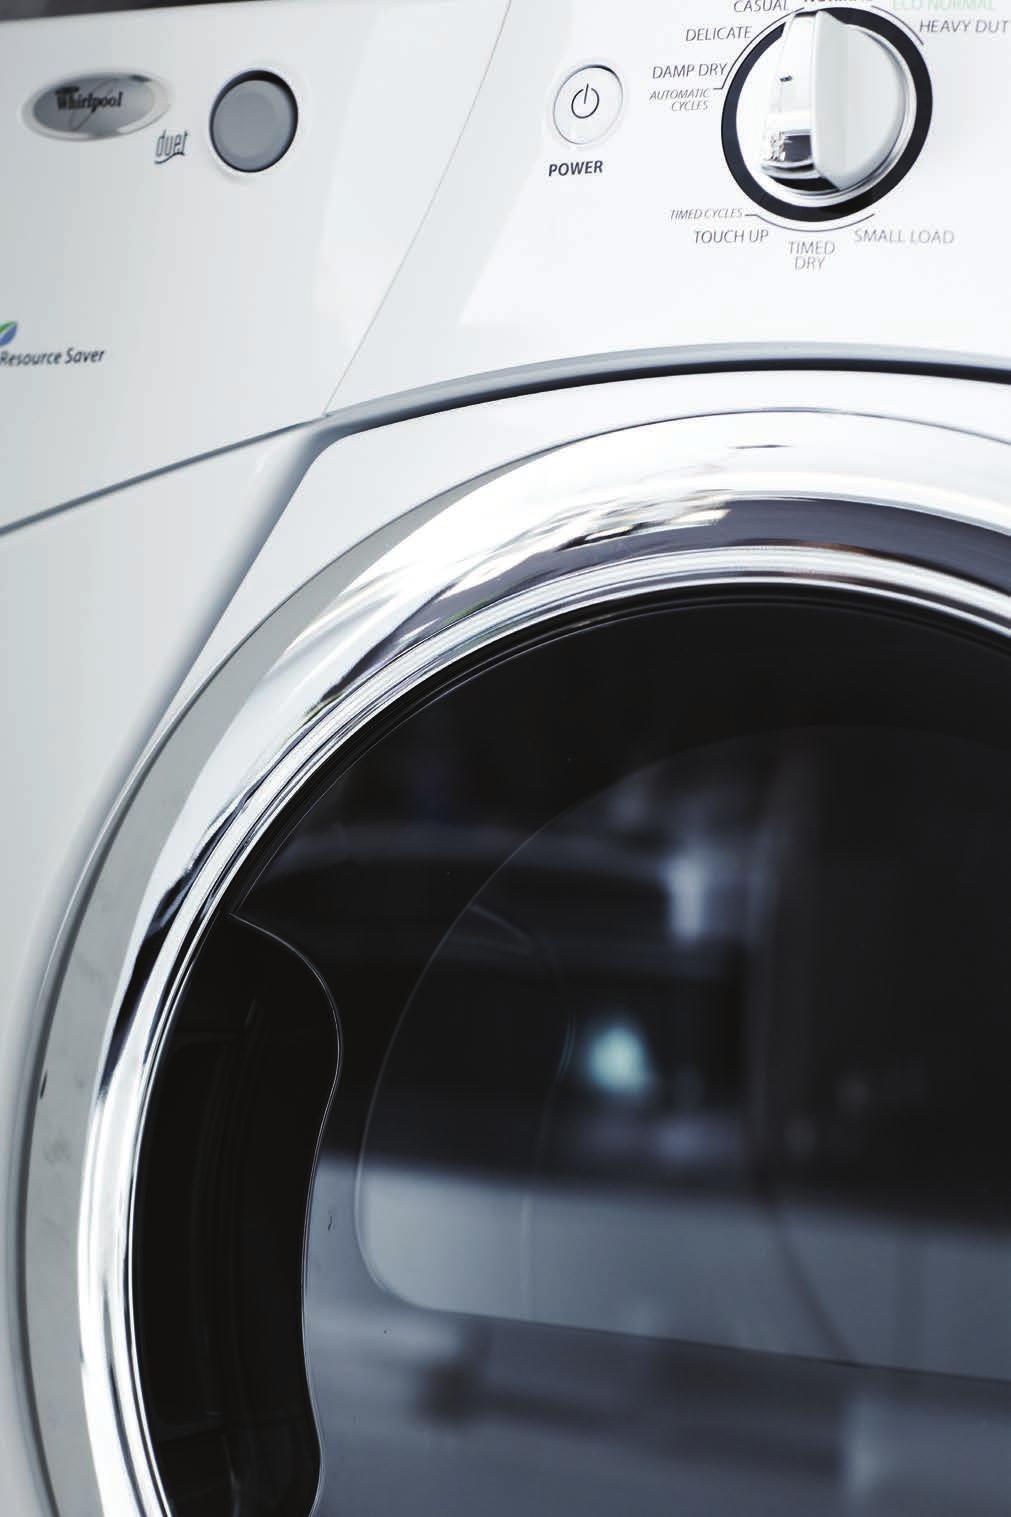 Appliance and Technology Keep your margins moving forward and your customers coming back.